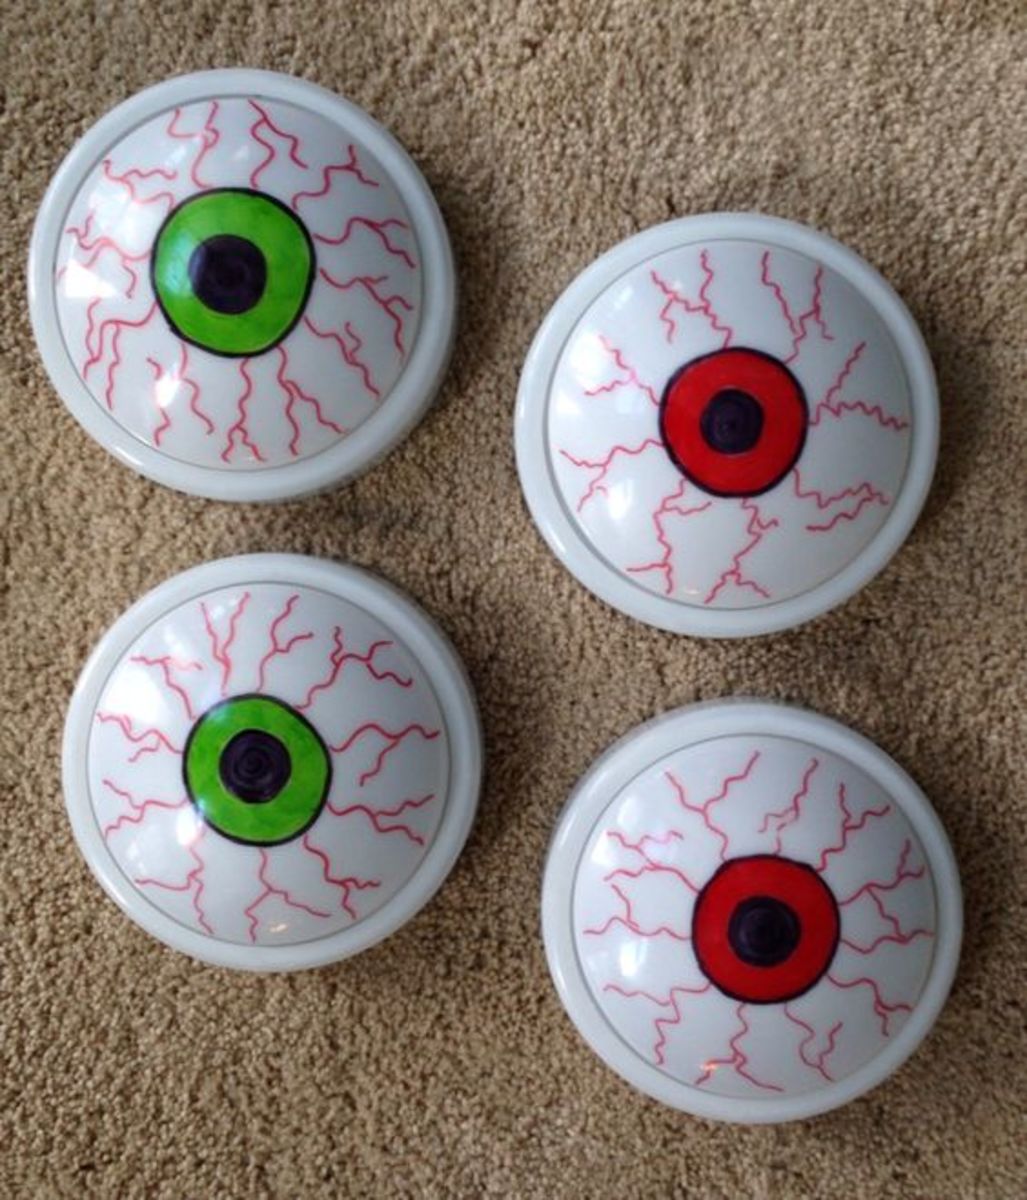 Dollar Tree push lights and sharpie markers make cute/cheap glowing eyes for Halloween decorations.